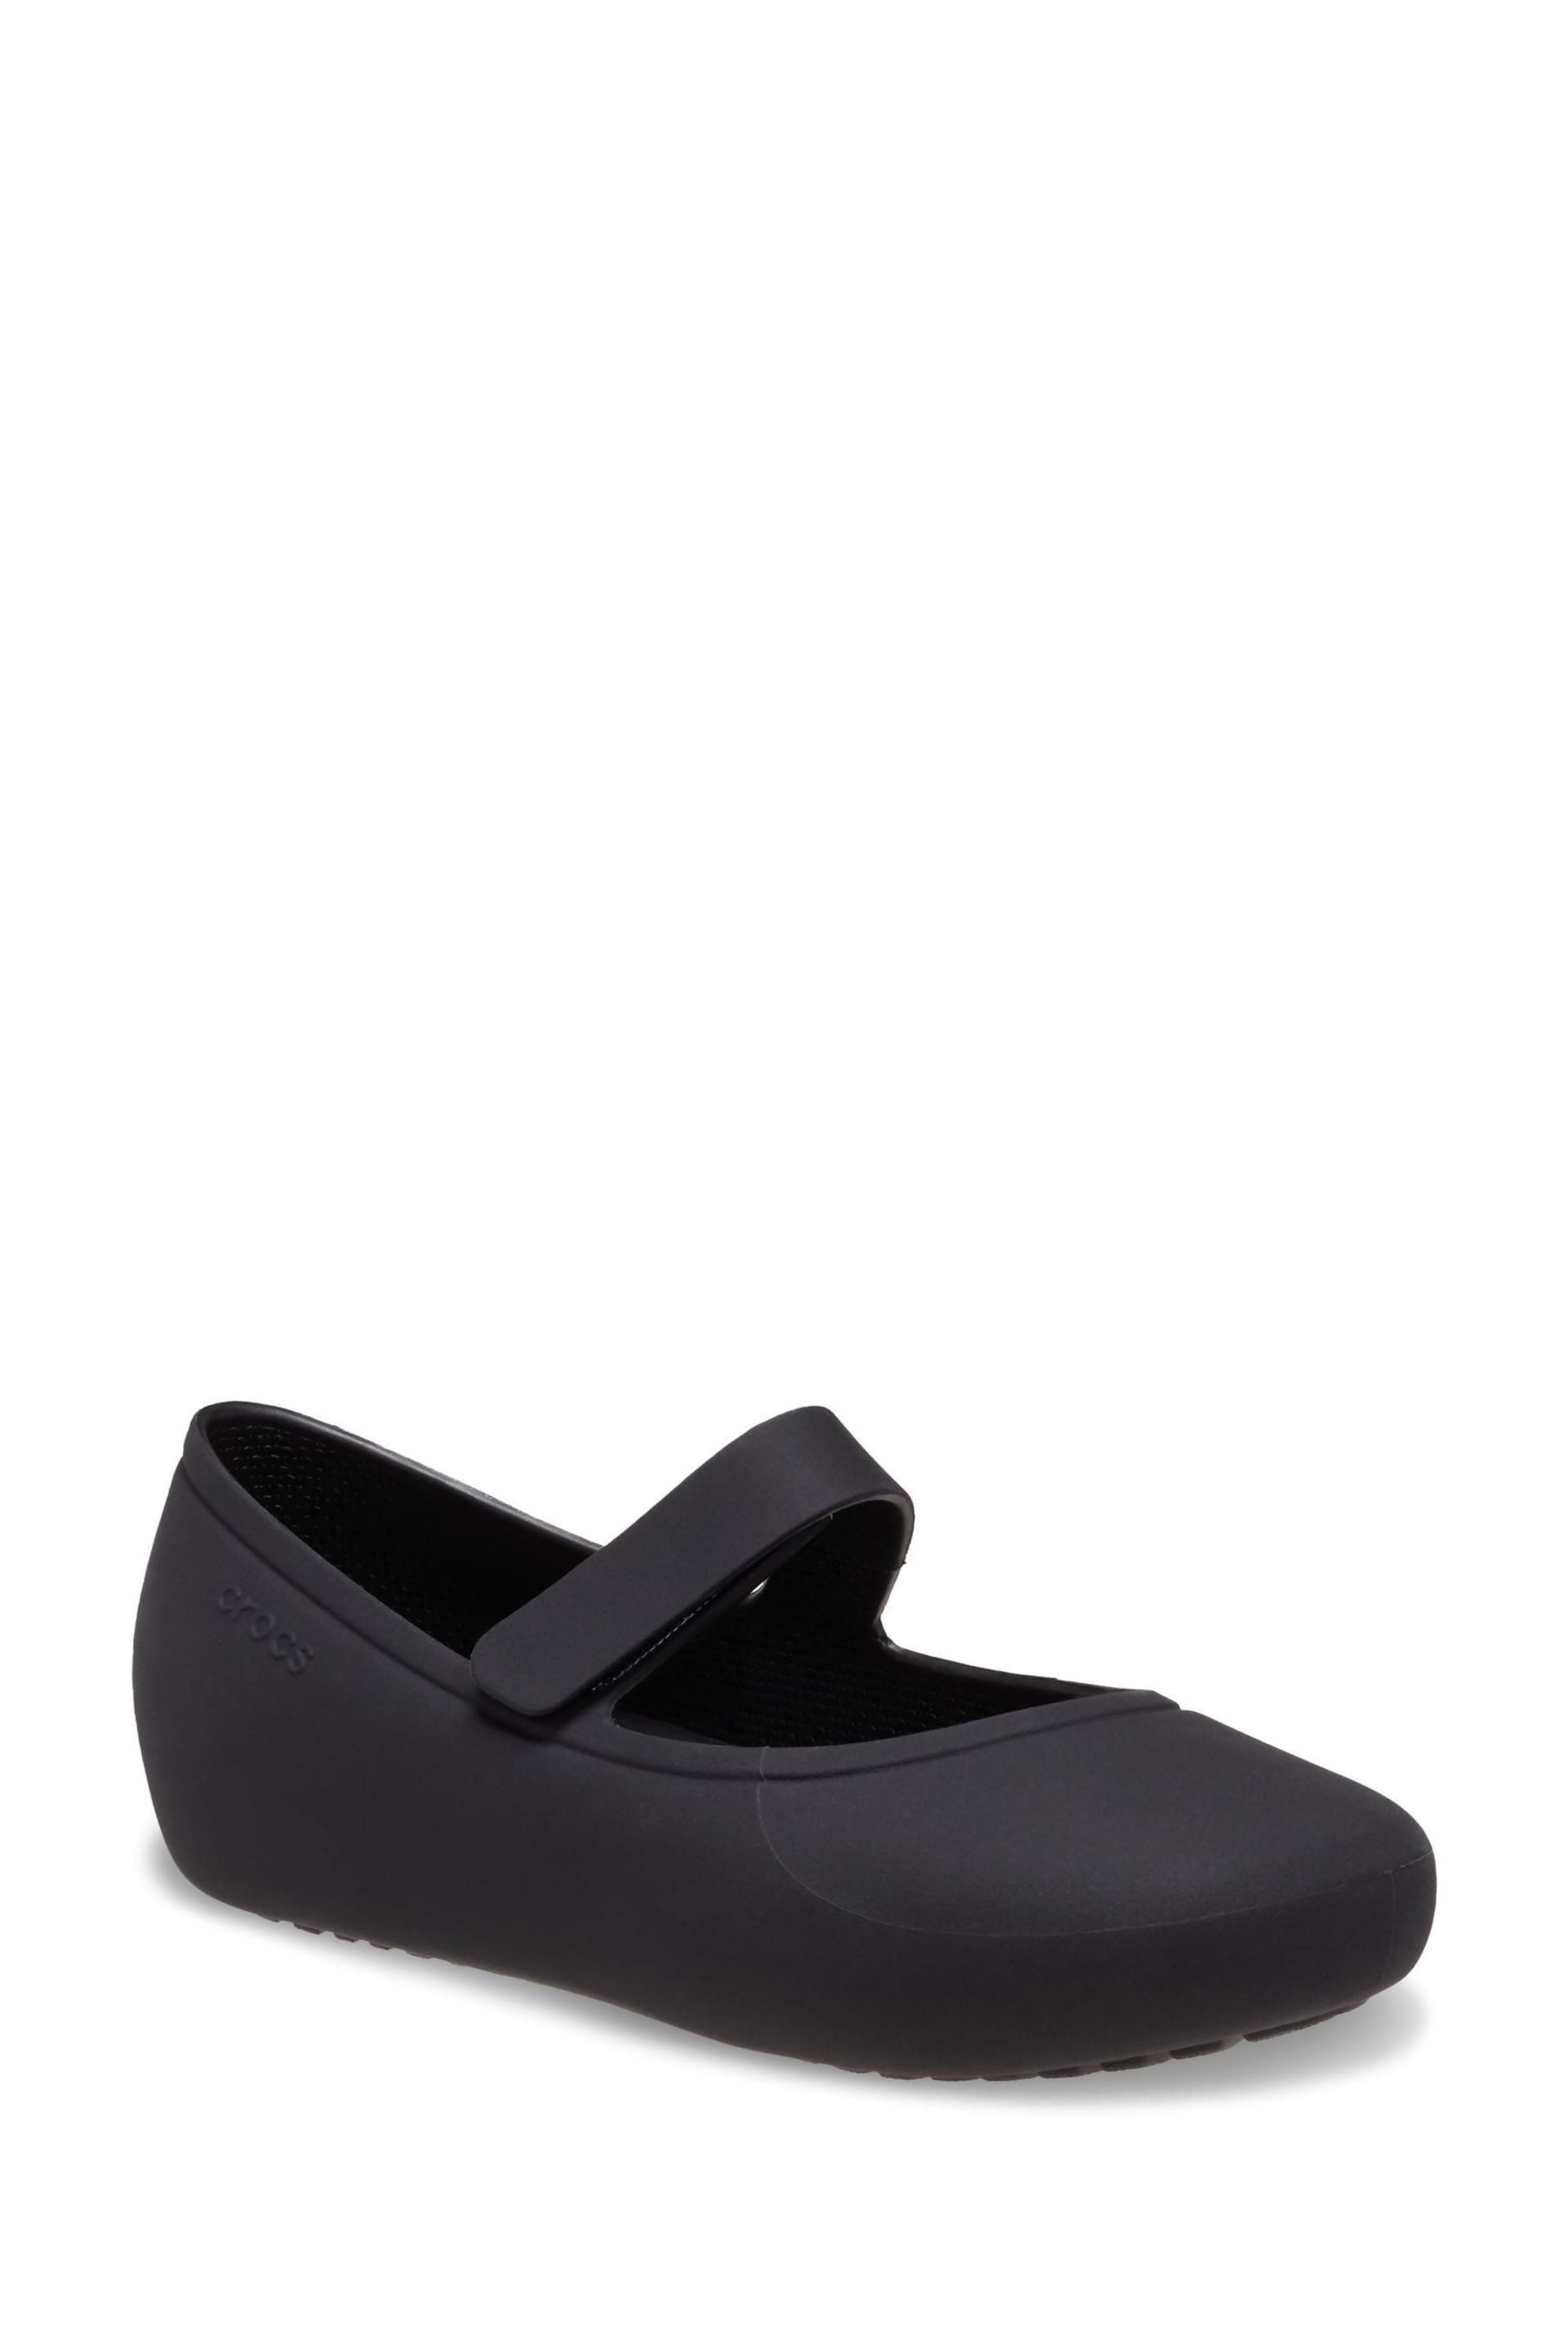 Crocs Brooklyn Mary Jane Toddler Flat Black Shoes - Image 7 of 7